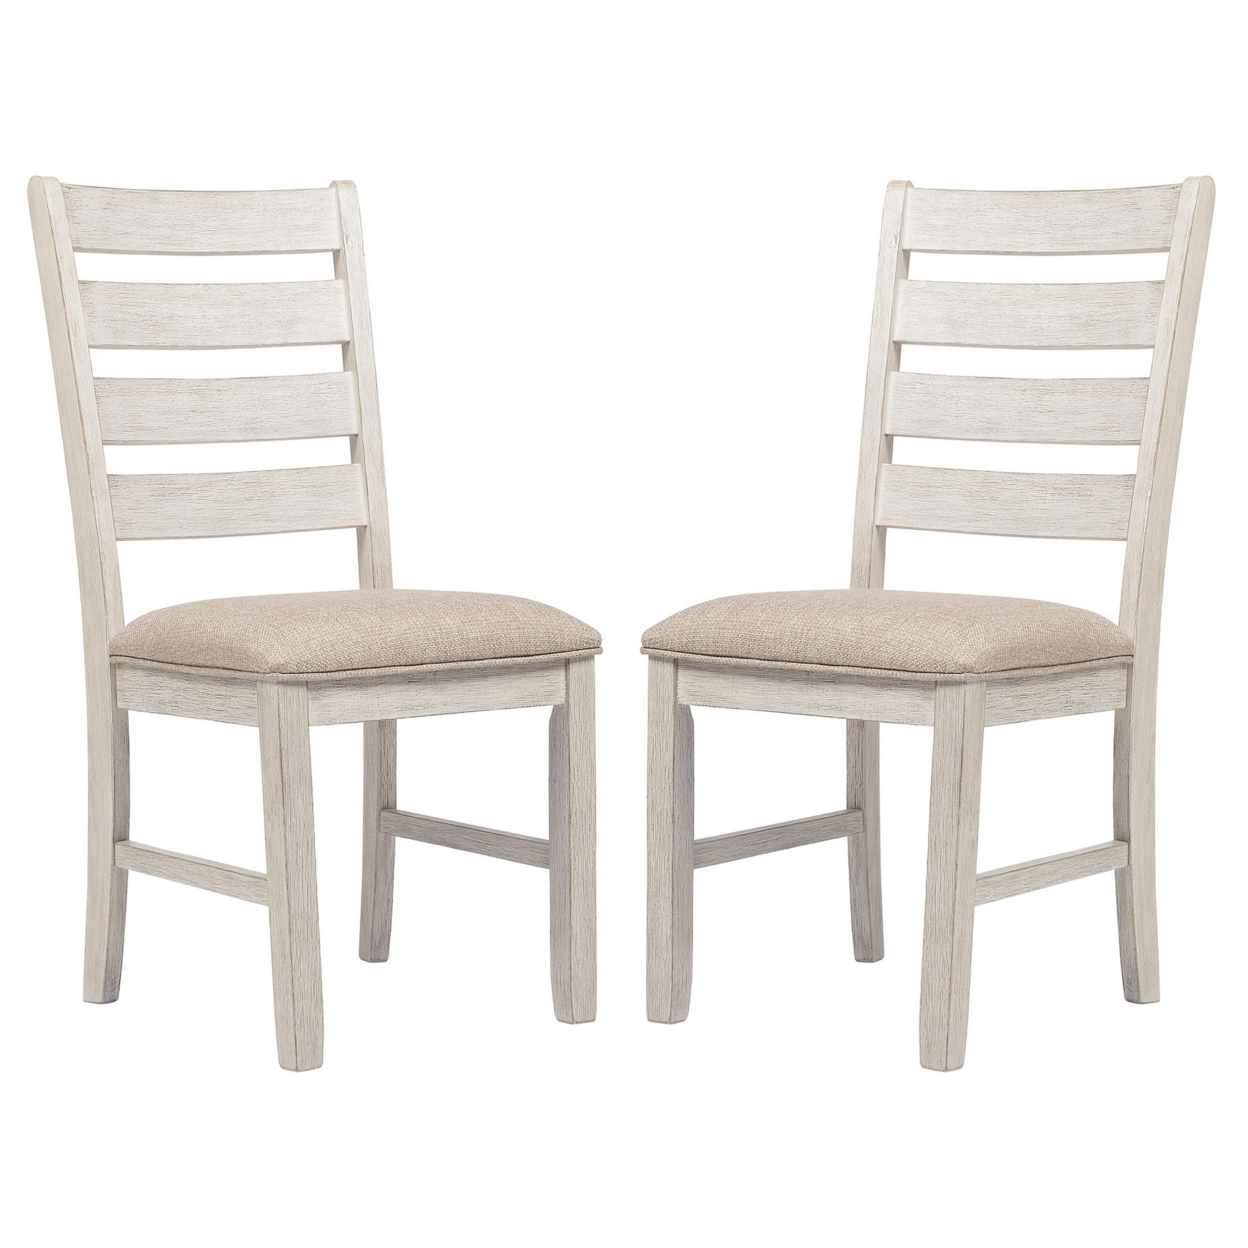 Fabric Dining Side Chair With Ladder Back, Set Of 2, White And Brown- Saltoro Sherpi